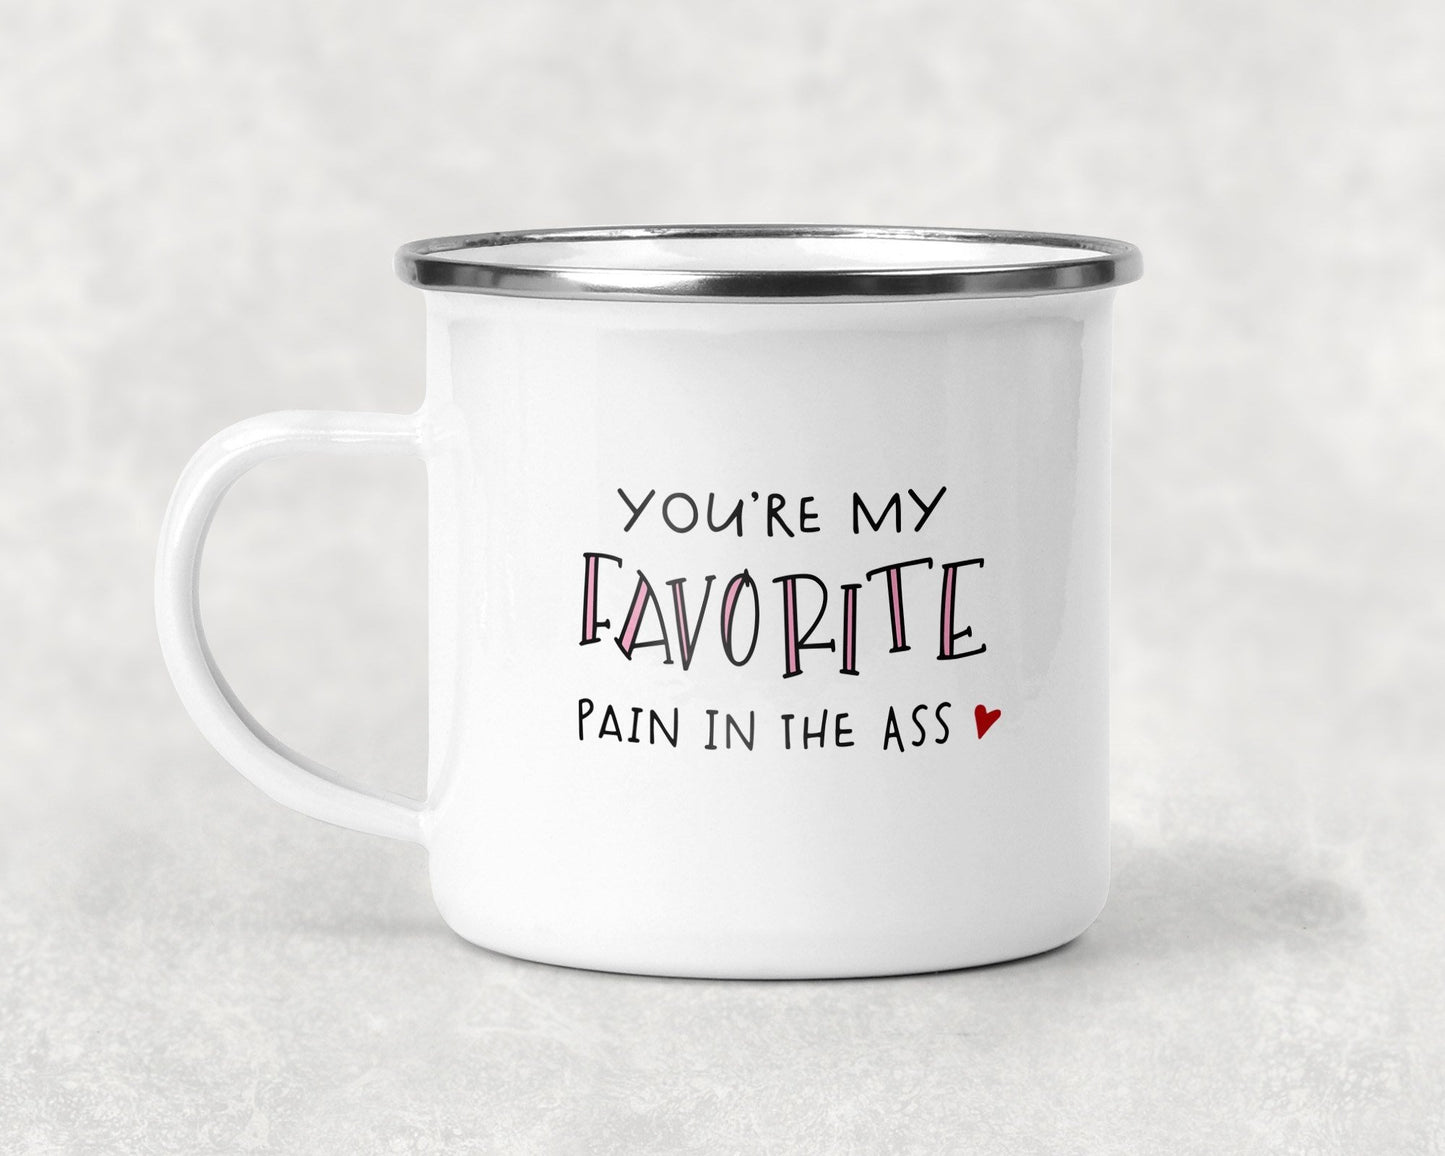 Youre My Favorite Pain In The A** Mug Coffee